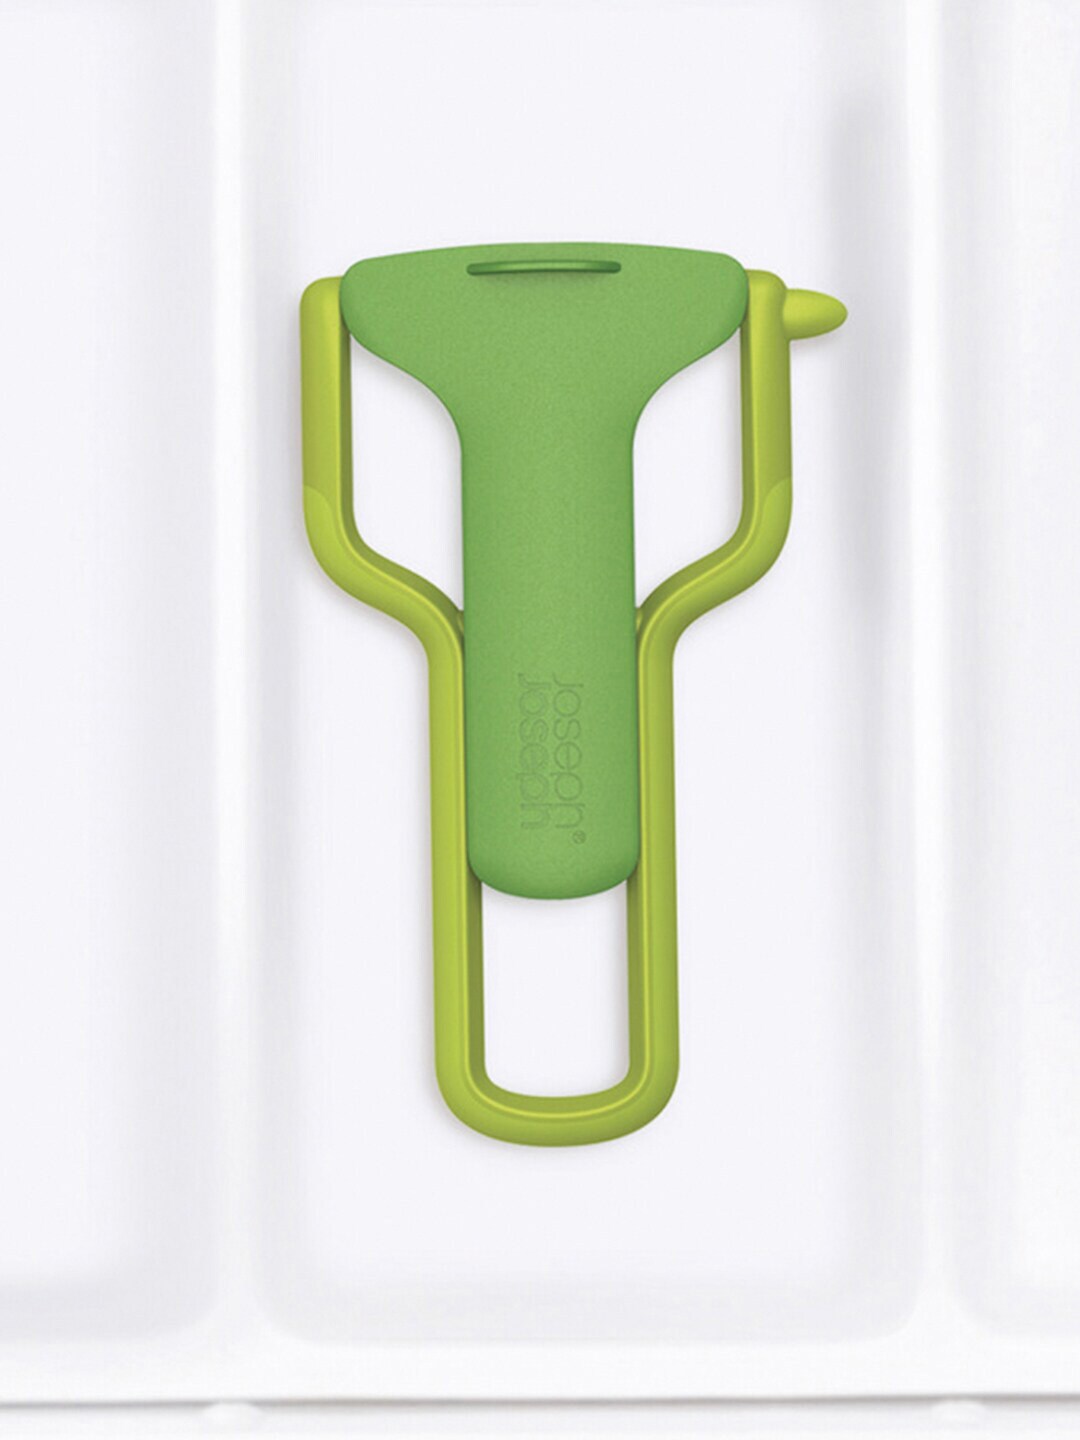 Joseph Joseph Green Stainless Steel Y Shaped Peeler with Blade Guard Price in India